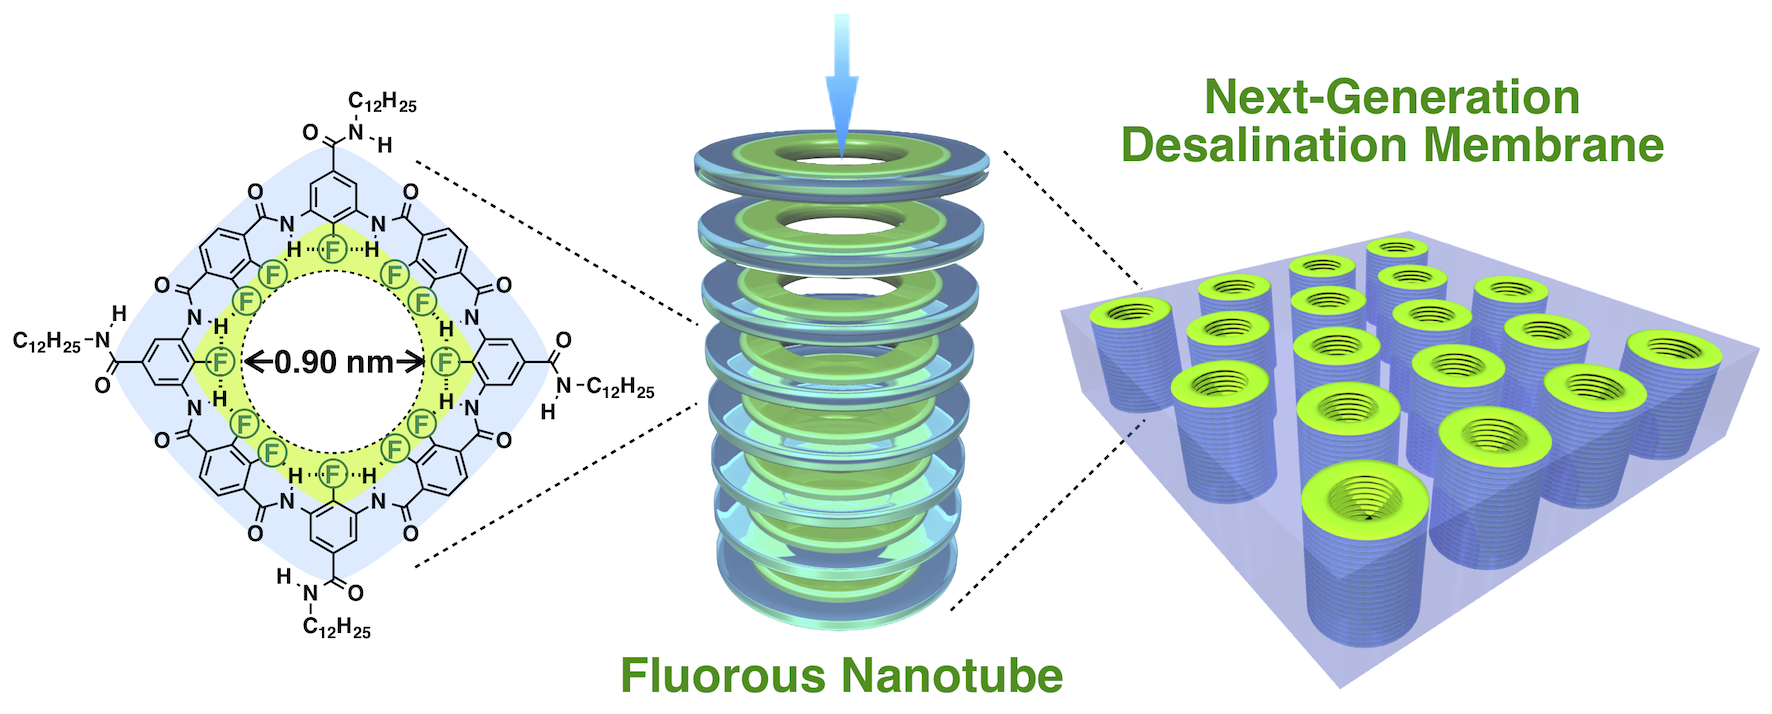 Fluorous nanotubes. Reducing the energy and thus financial cost, as well as improving the simplicity of water desalination